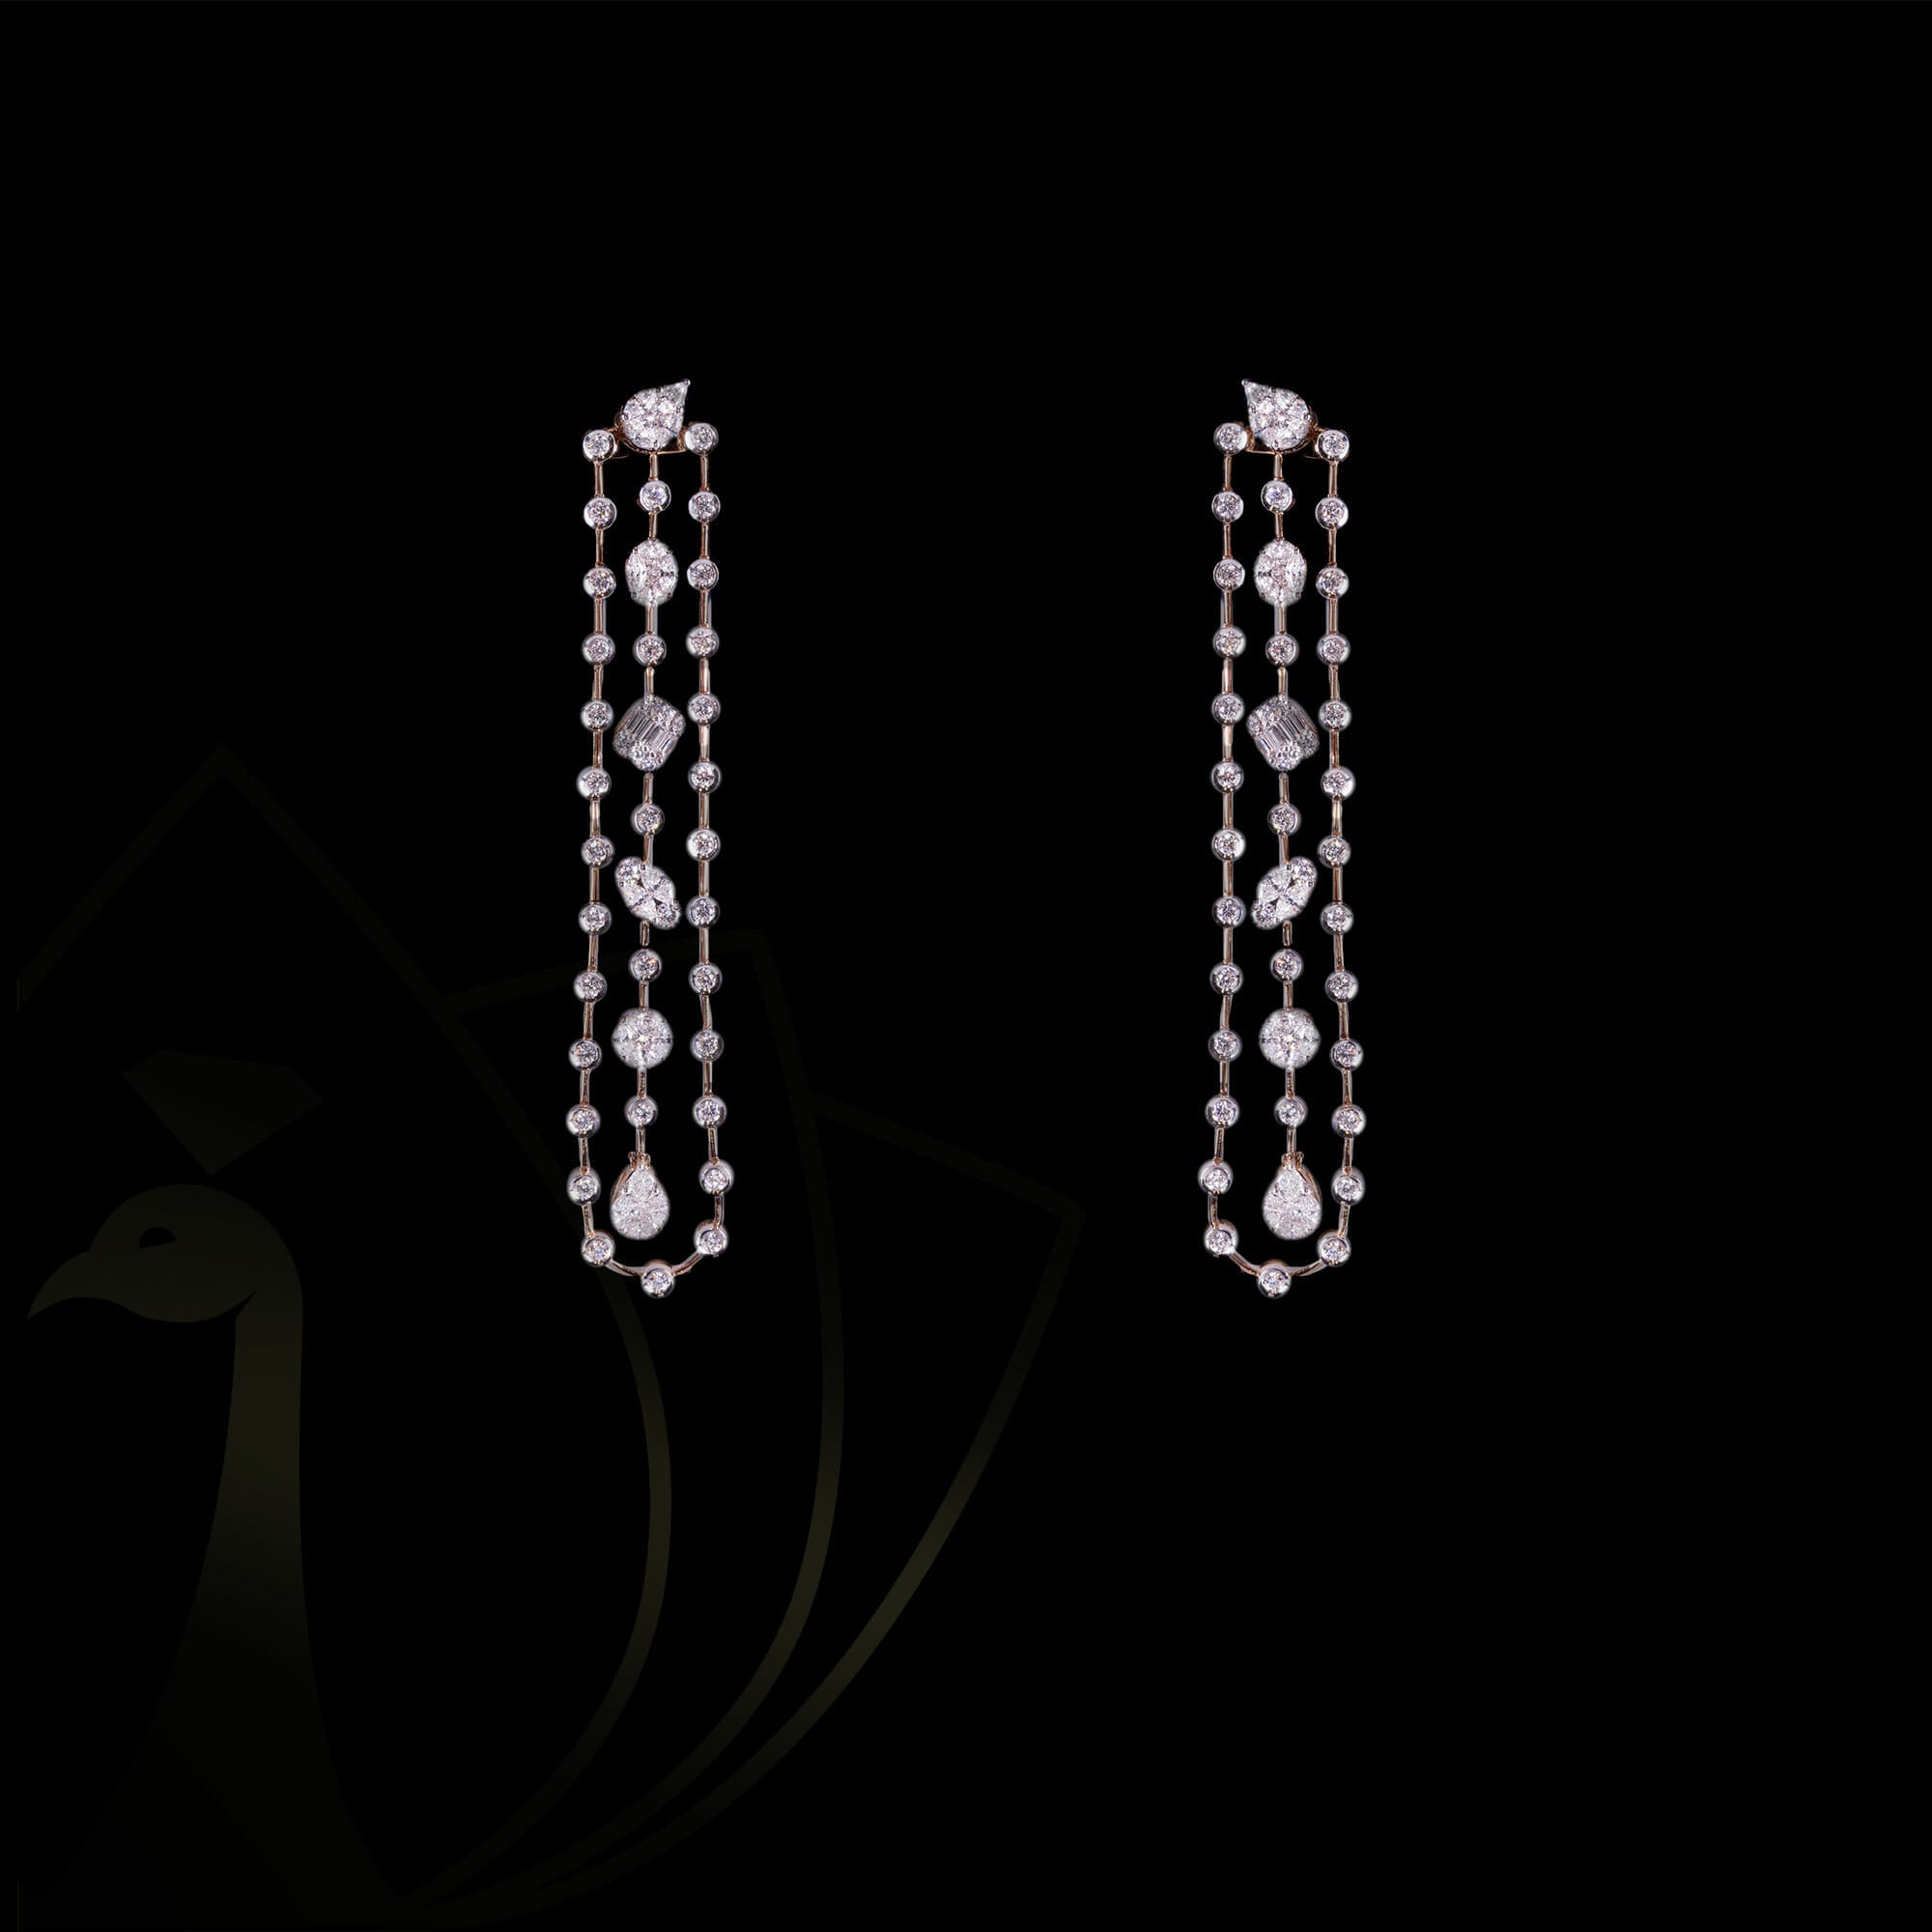 A pair of classic symphony diamond chandelier earrings.